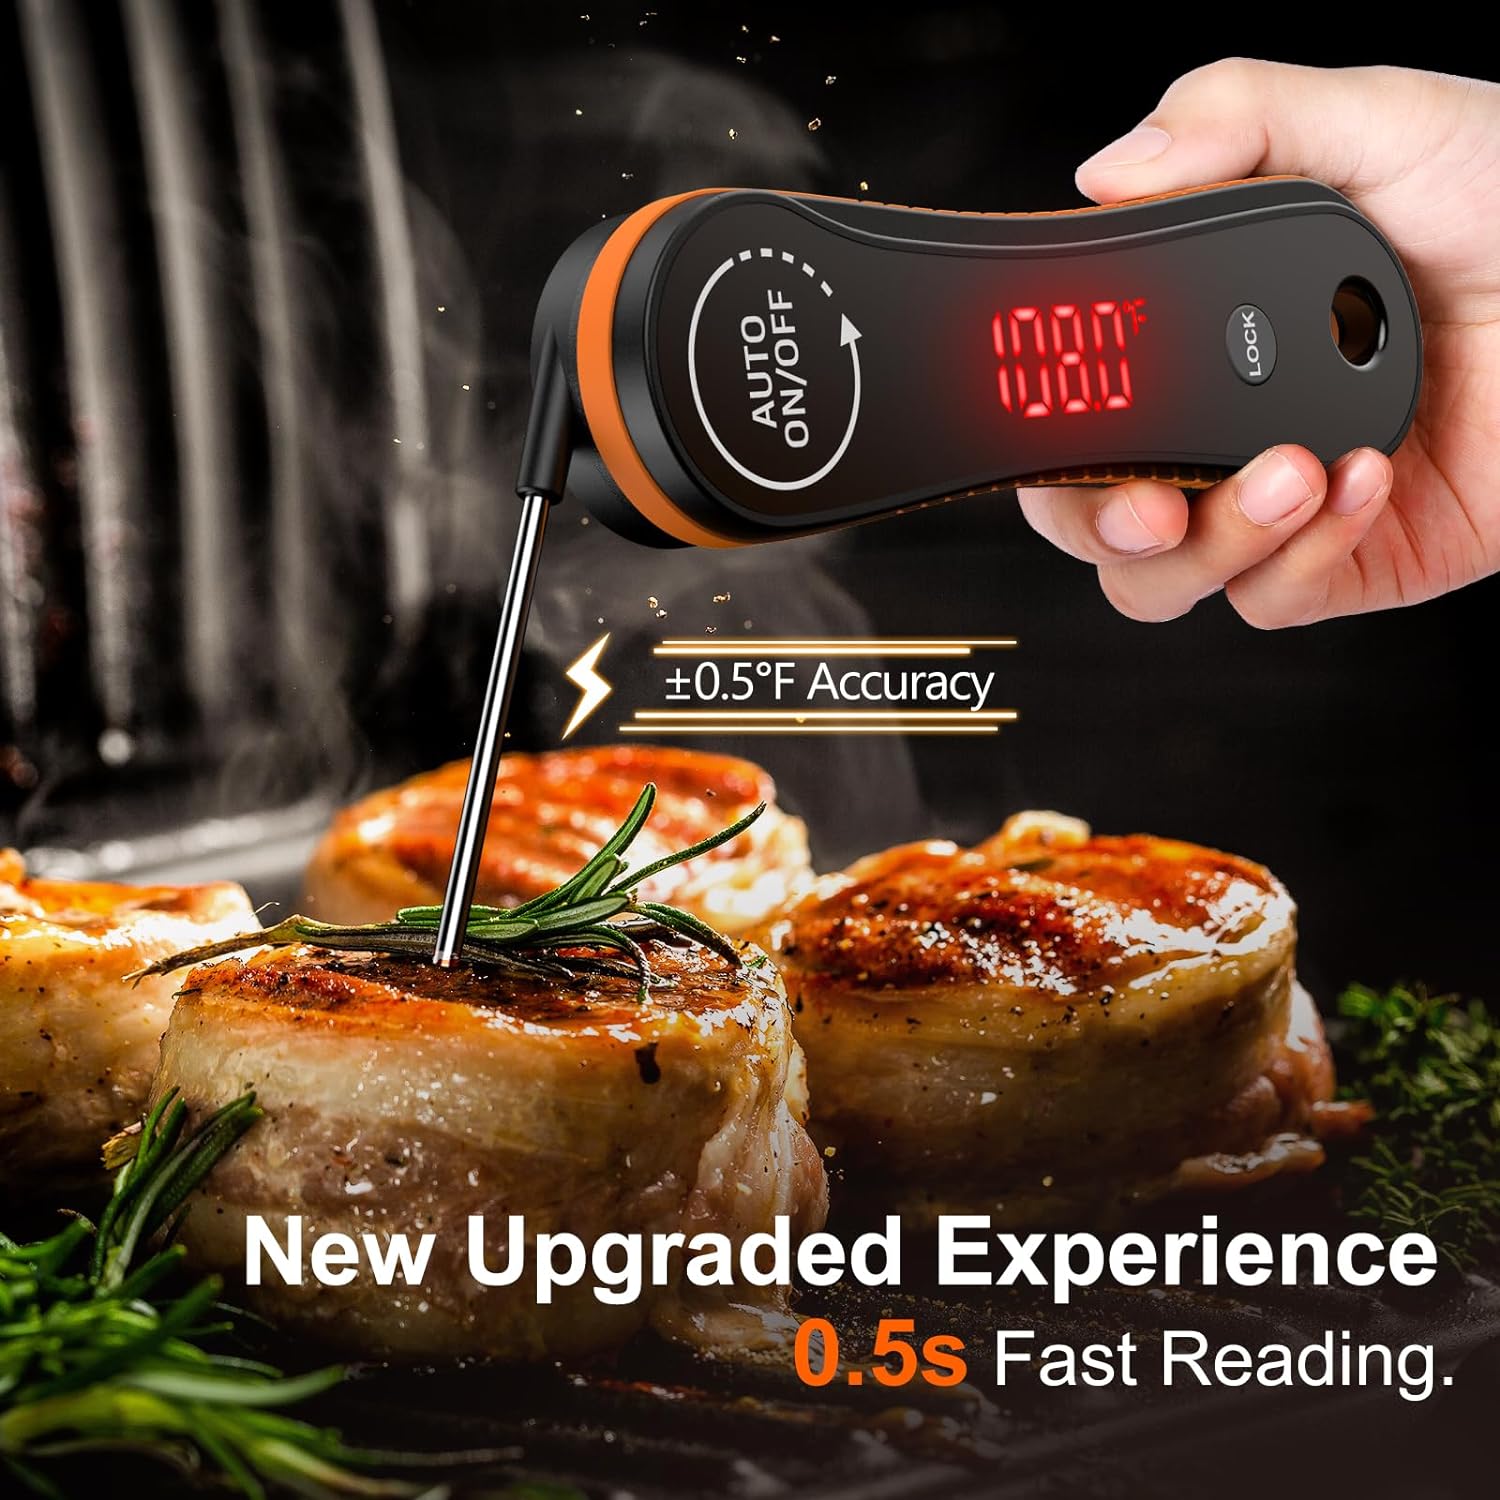 0.5 Seconds Instant Read Digital Meat Thermometer, ±0.5°F Accuracy, 180°Rotating Display, IP67 Waterproof Non-Slip Handle, Lift to Wake and Auto Off, Food Thermometer for Precise Cooking